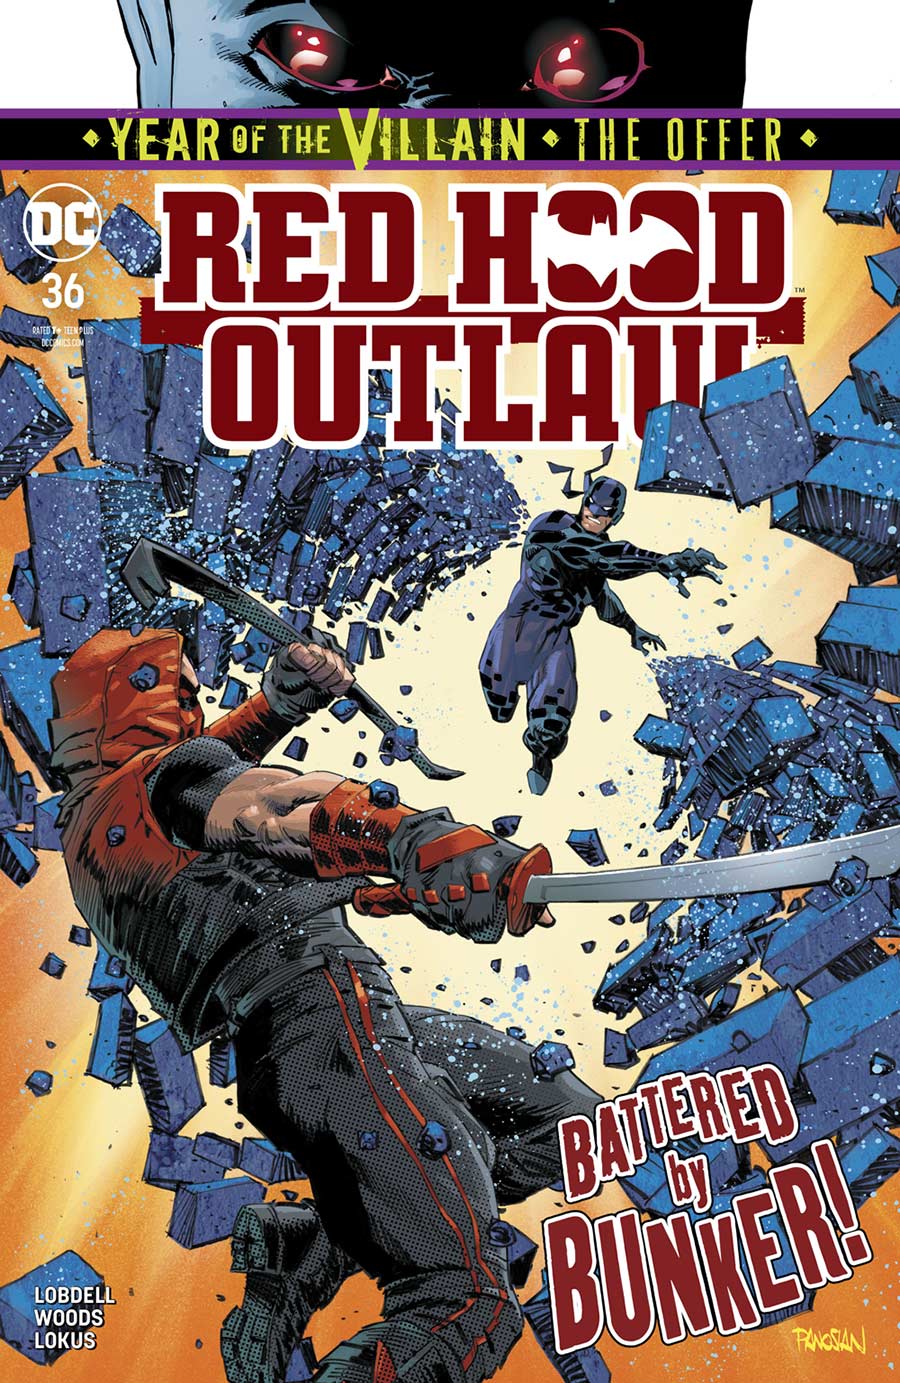 Red Hood: Outlaw